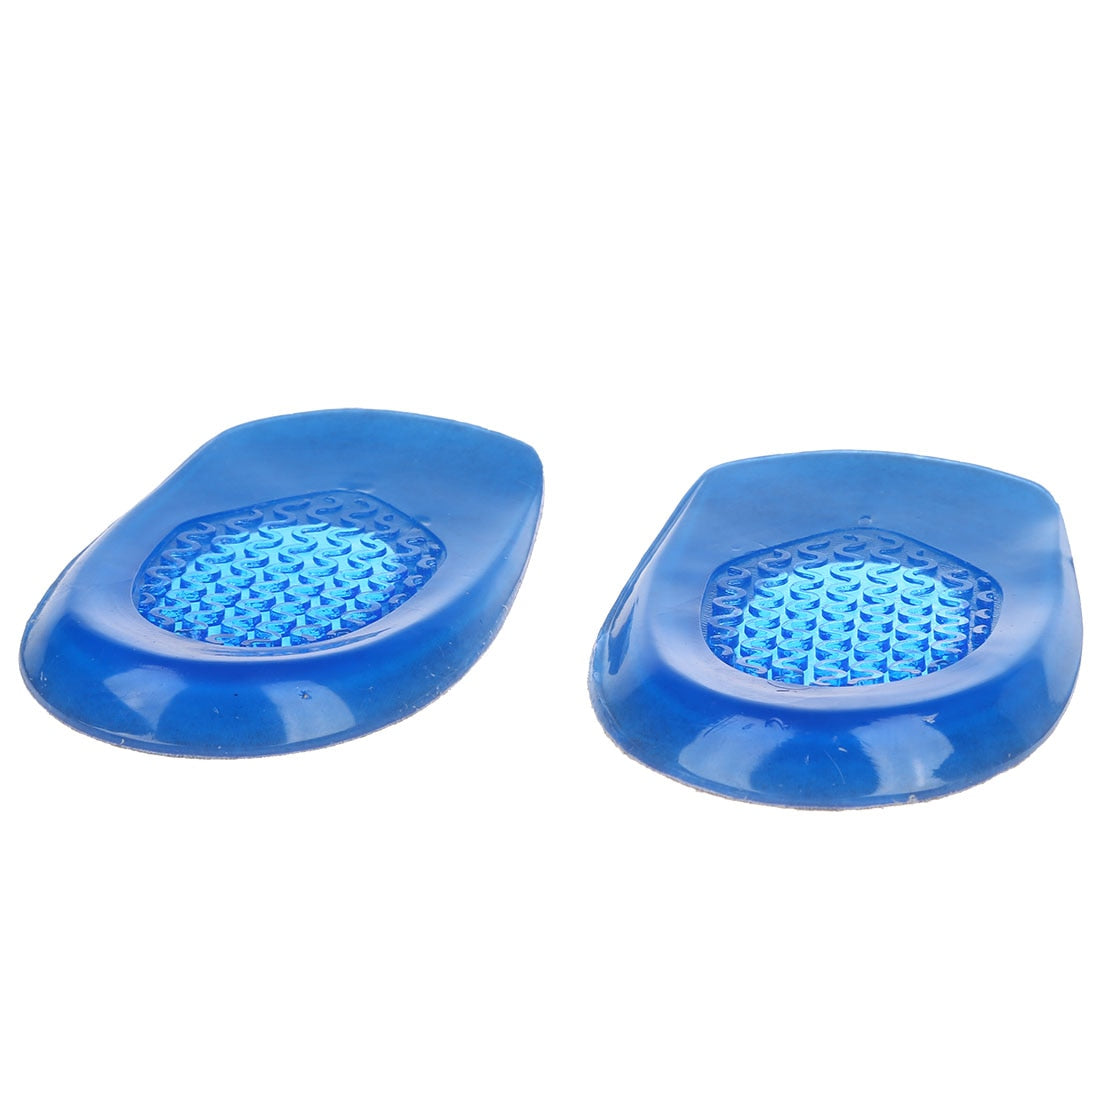 1 Pair Silicone Gel orthopedic Insoles Back Pad Heel Cup for Calcaneal Pain Health Feet Care Support spur feet cushion pads - ebowsos